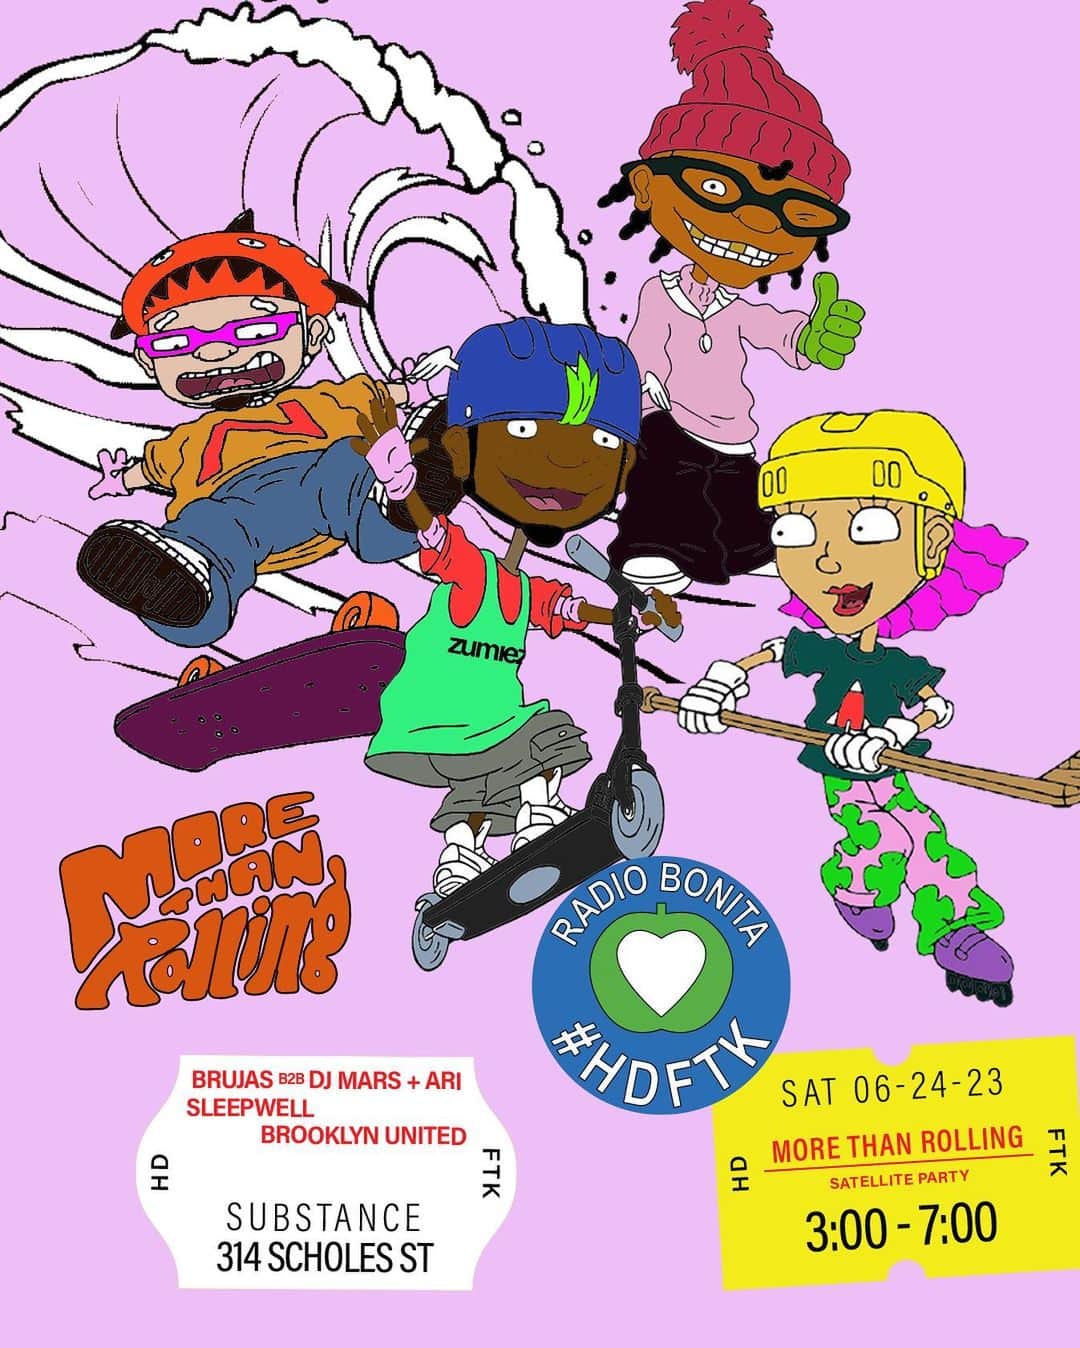 zumiezのインスタグラム：「@radio.bonita is Live at Substance Skatepark in Brooklyn this Saturday ! @zumiez “More Than Rolling” means all wheels are active on the floor ! ☮️🏄‍♀️🌊🛴🛼🛹.. Stream or show up and play ! food, vendors, prizes, and more ! 🎊🤍 www.radiobonita.nyc」